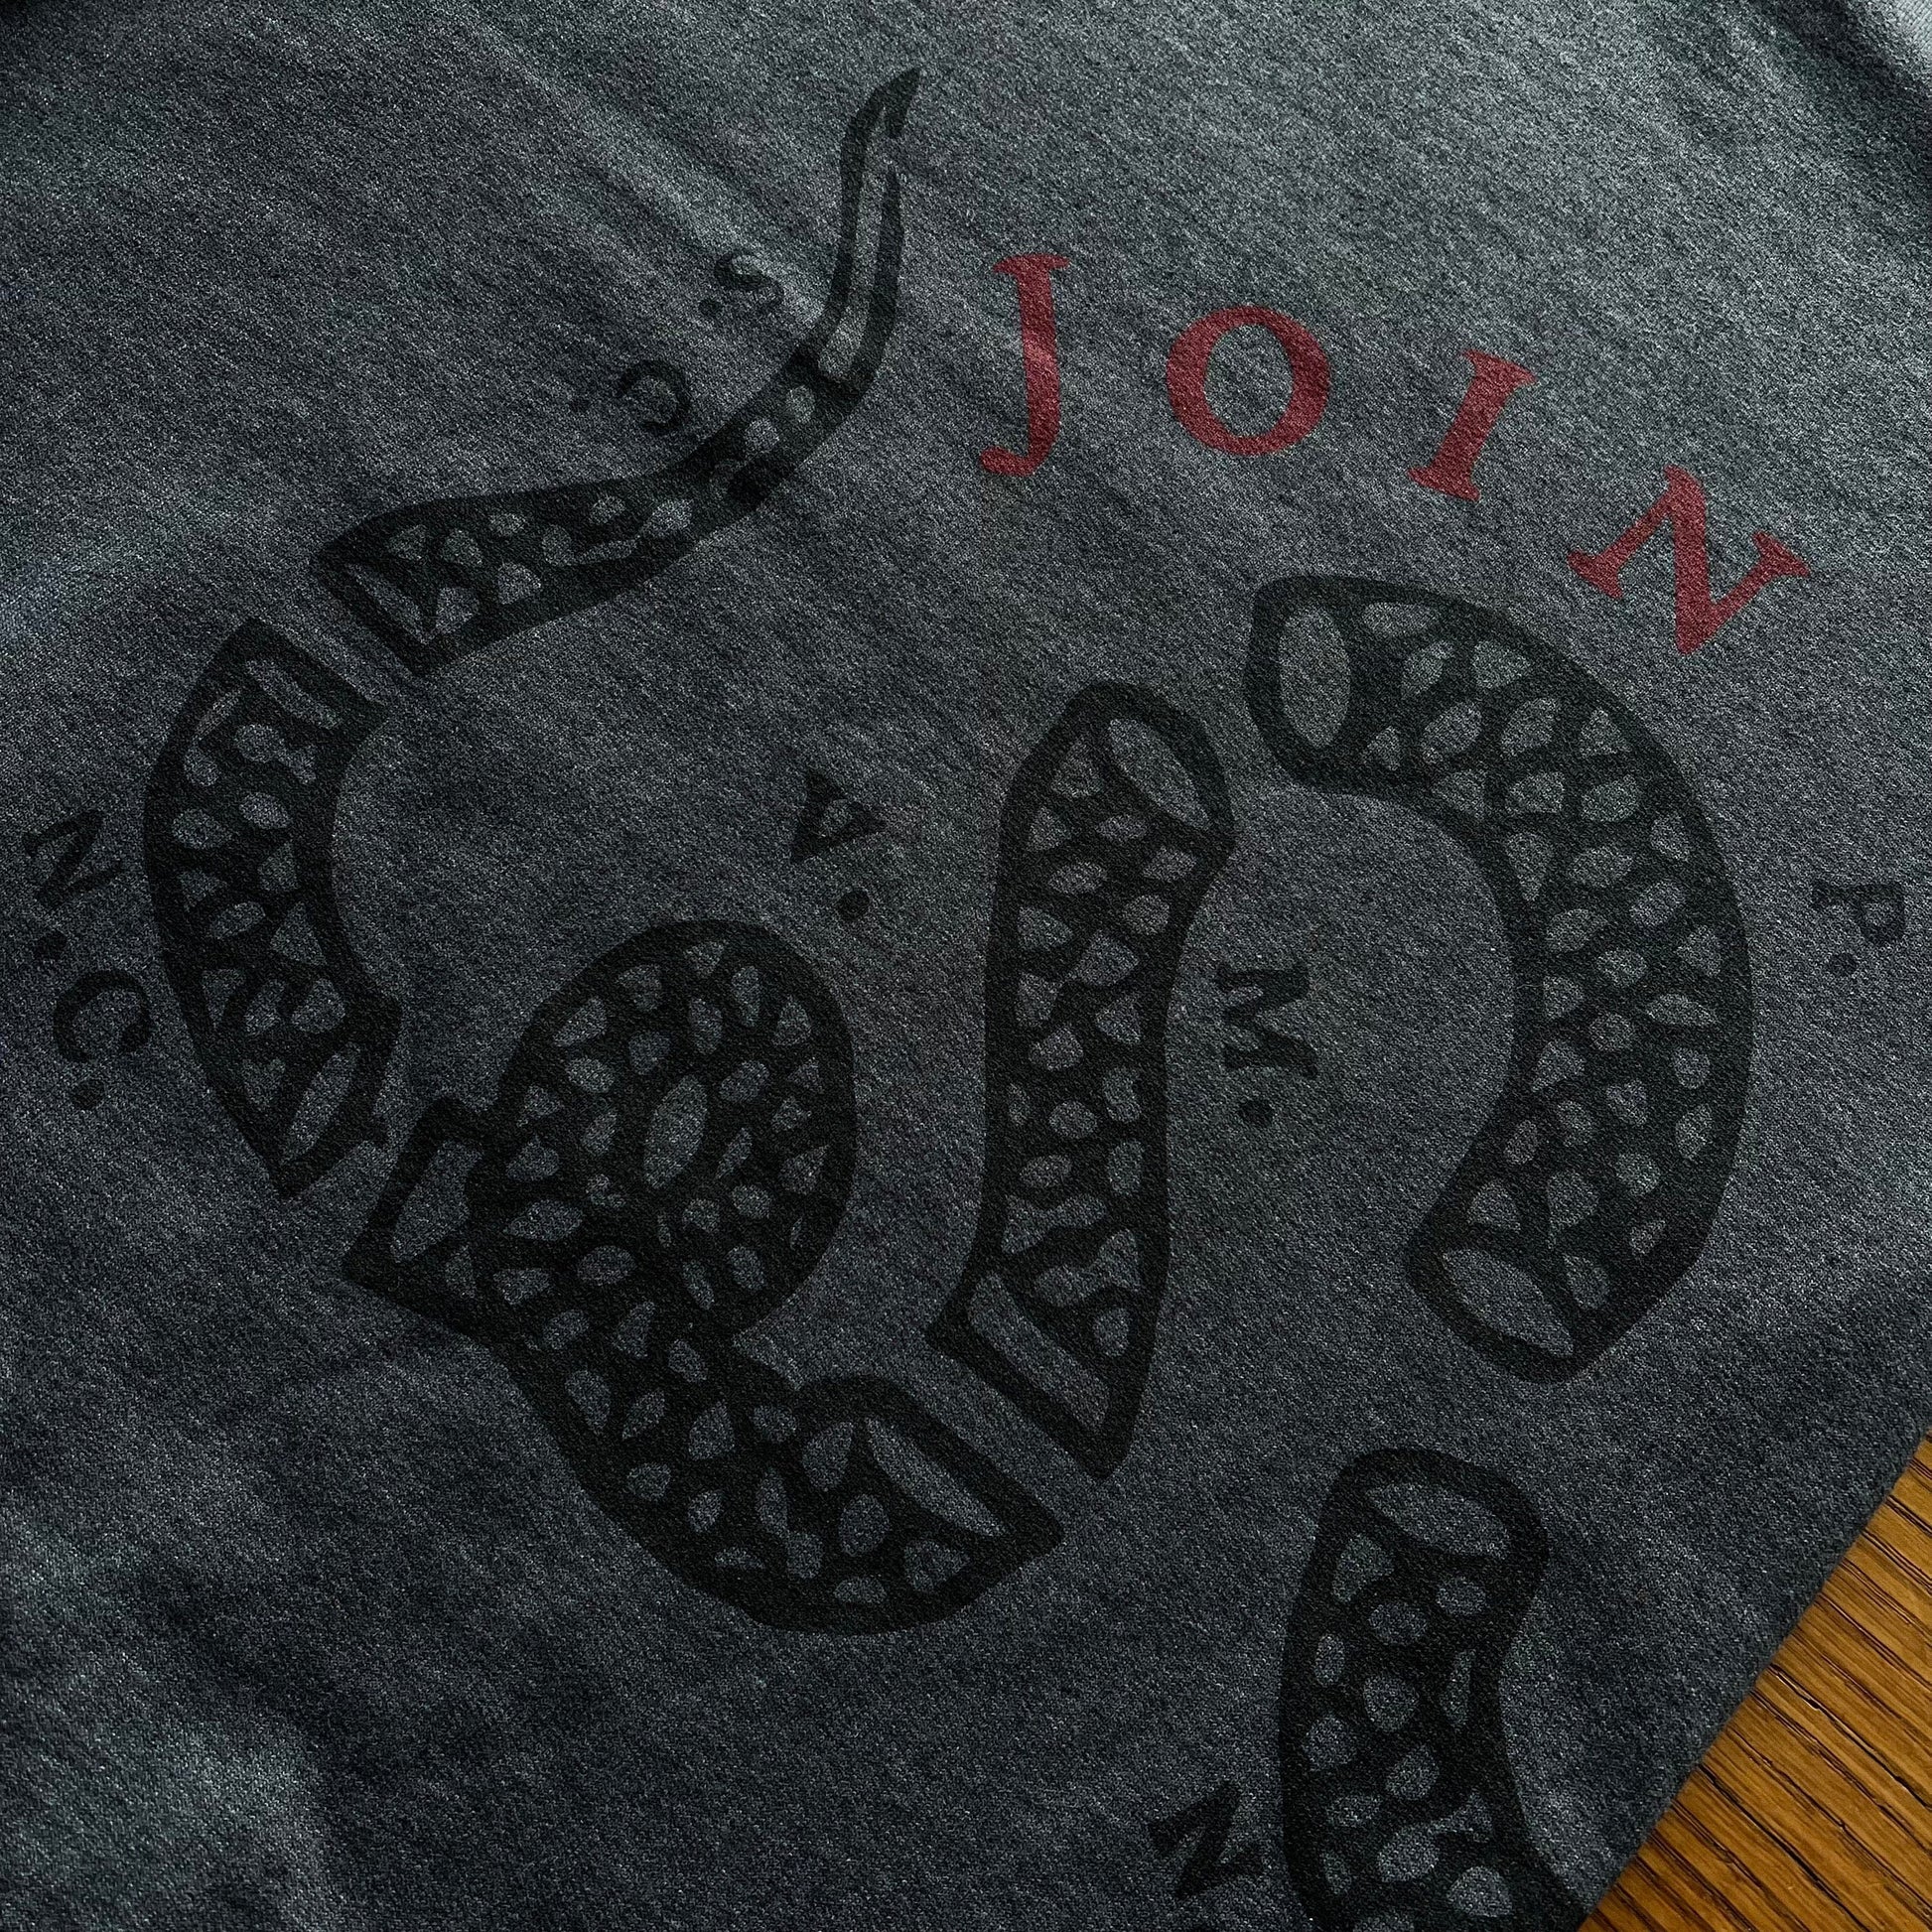 Front close-up of "Join or Die" Crewneck sweatshirt from the history lists store